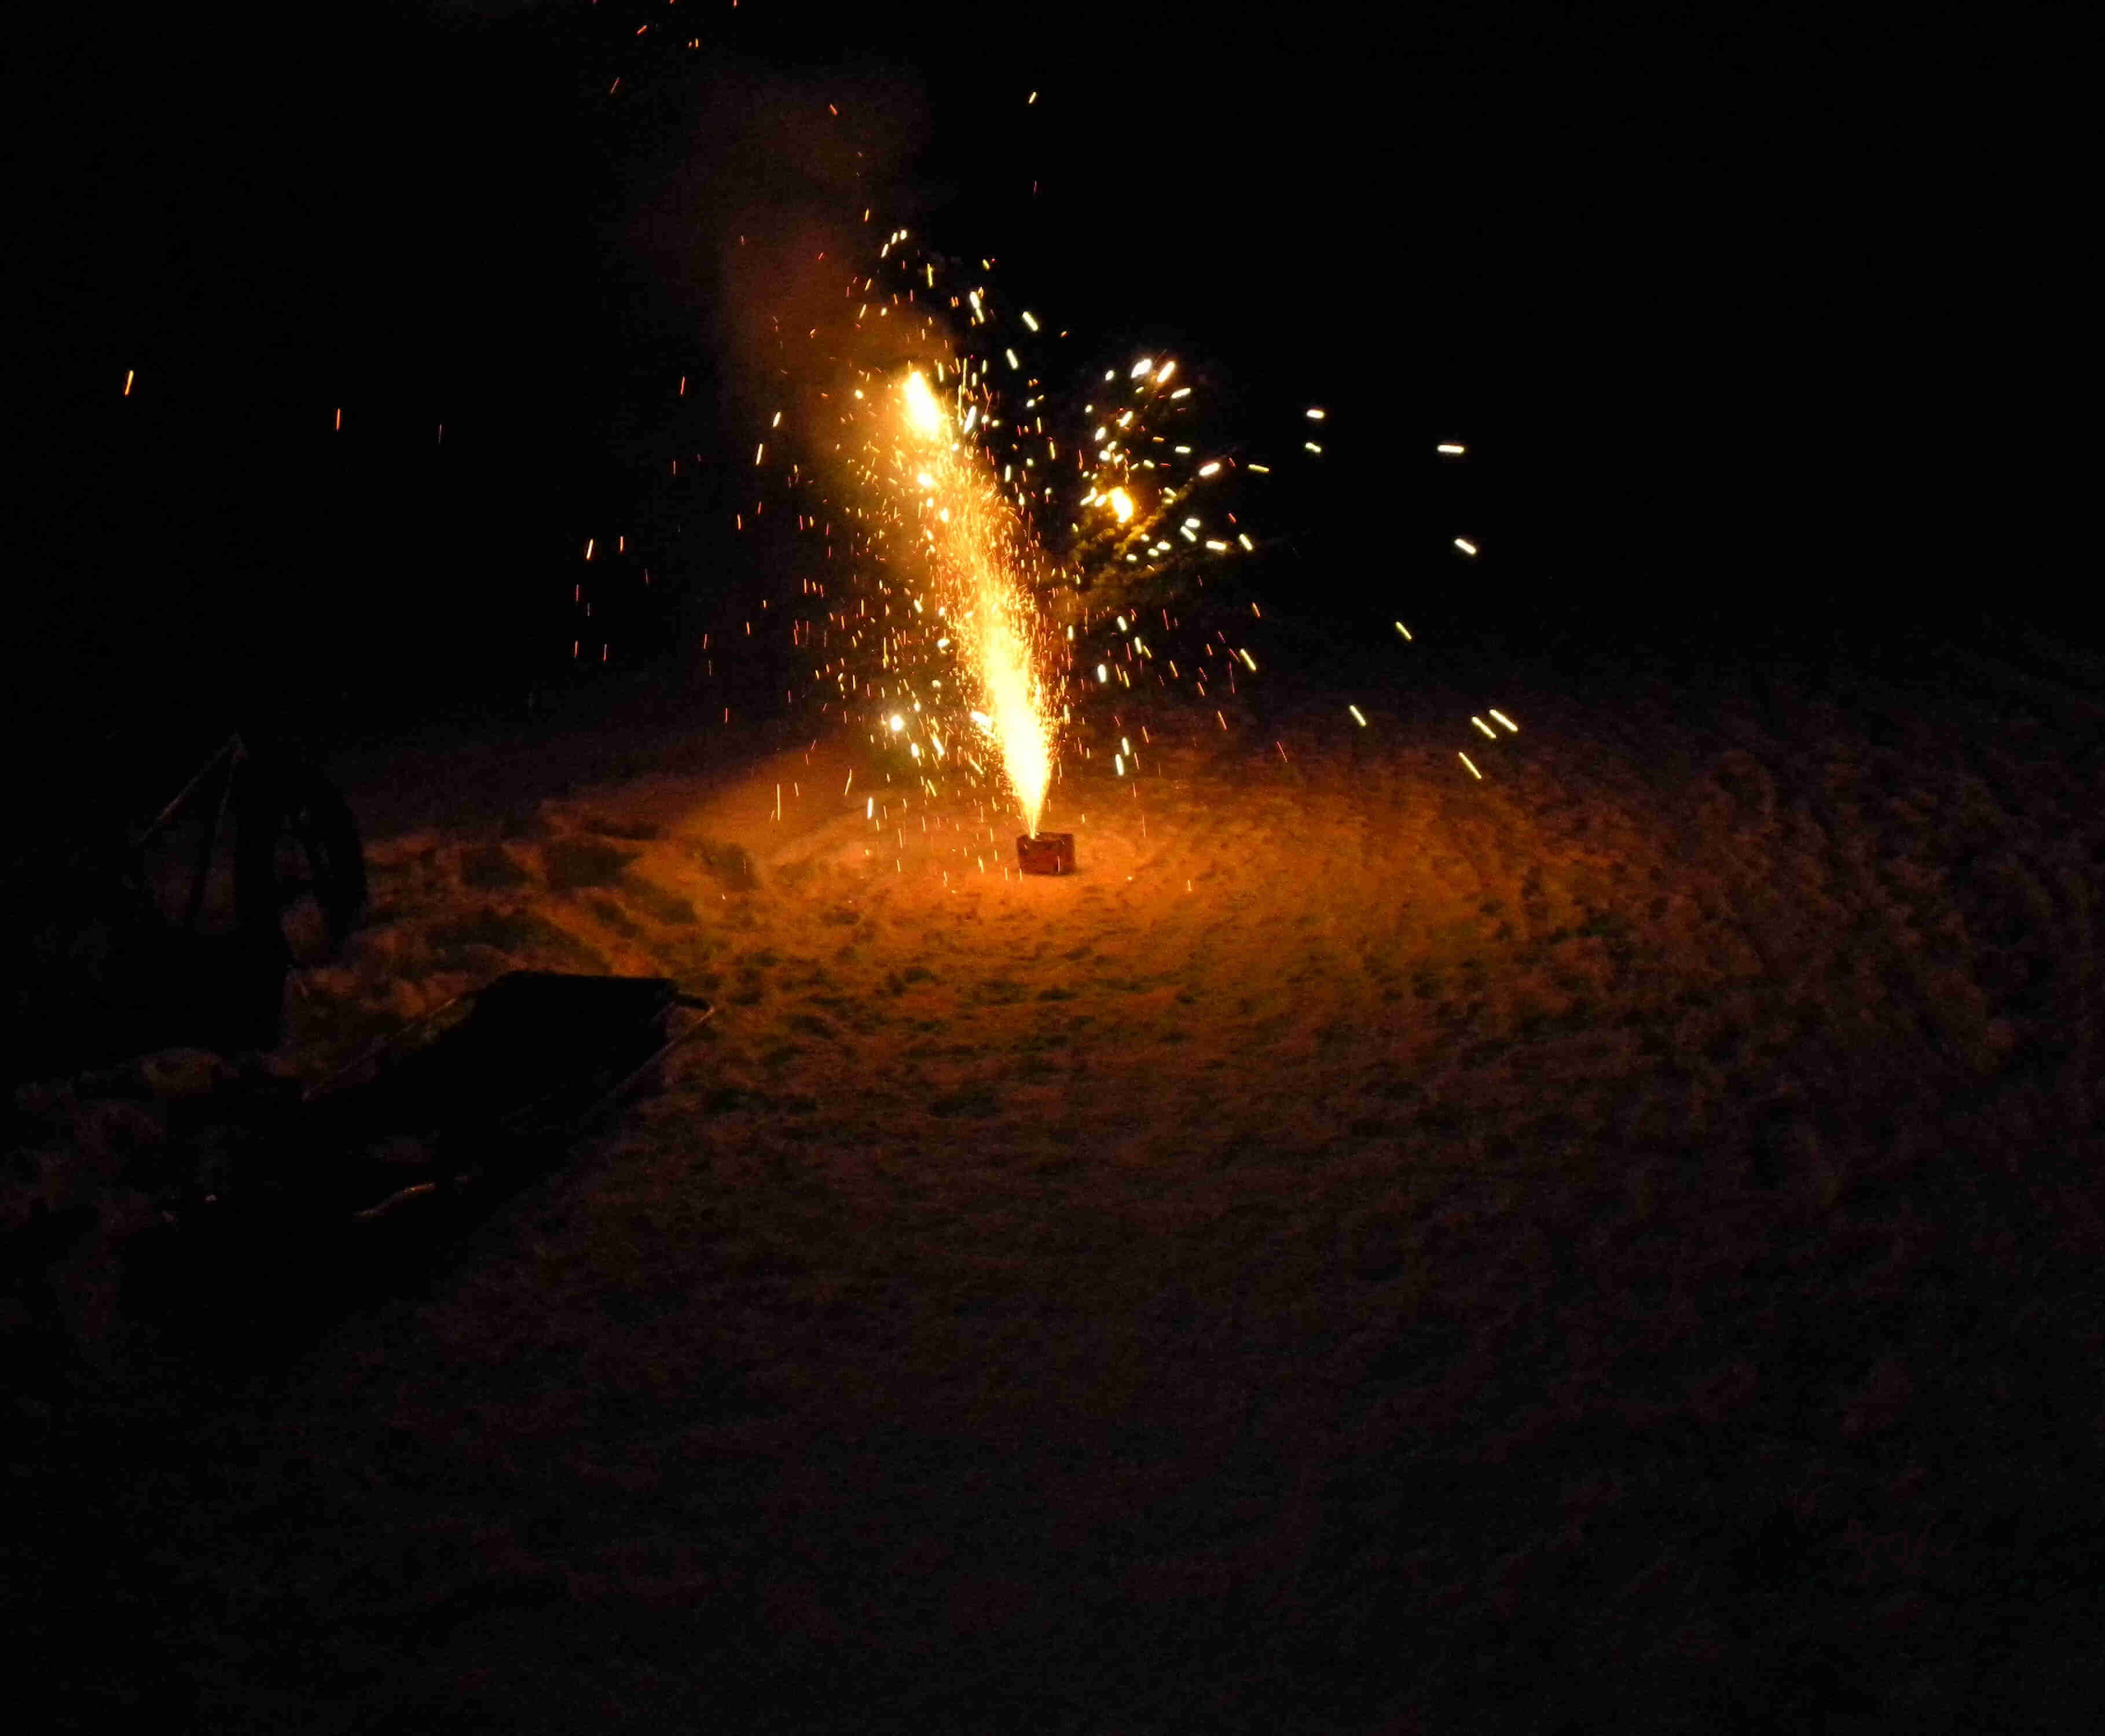 Nighttime view of fireworks showering sparks upward from a snow covered ground